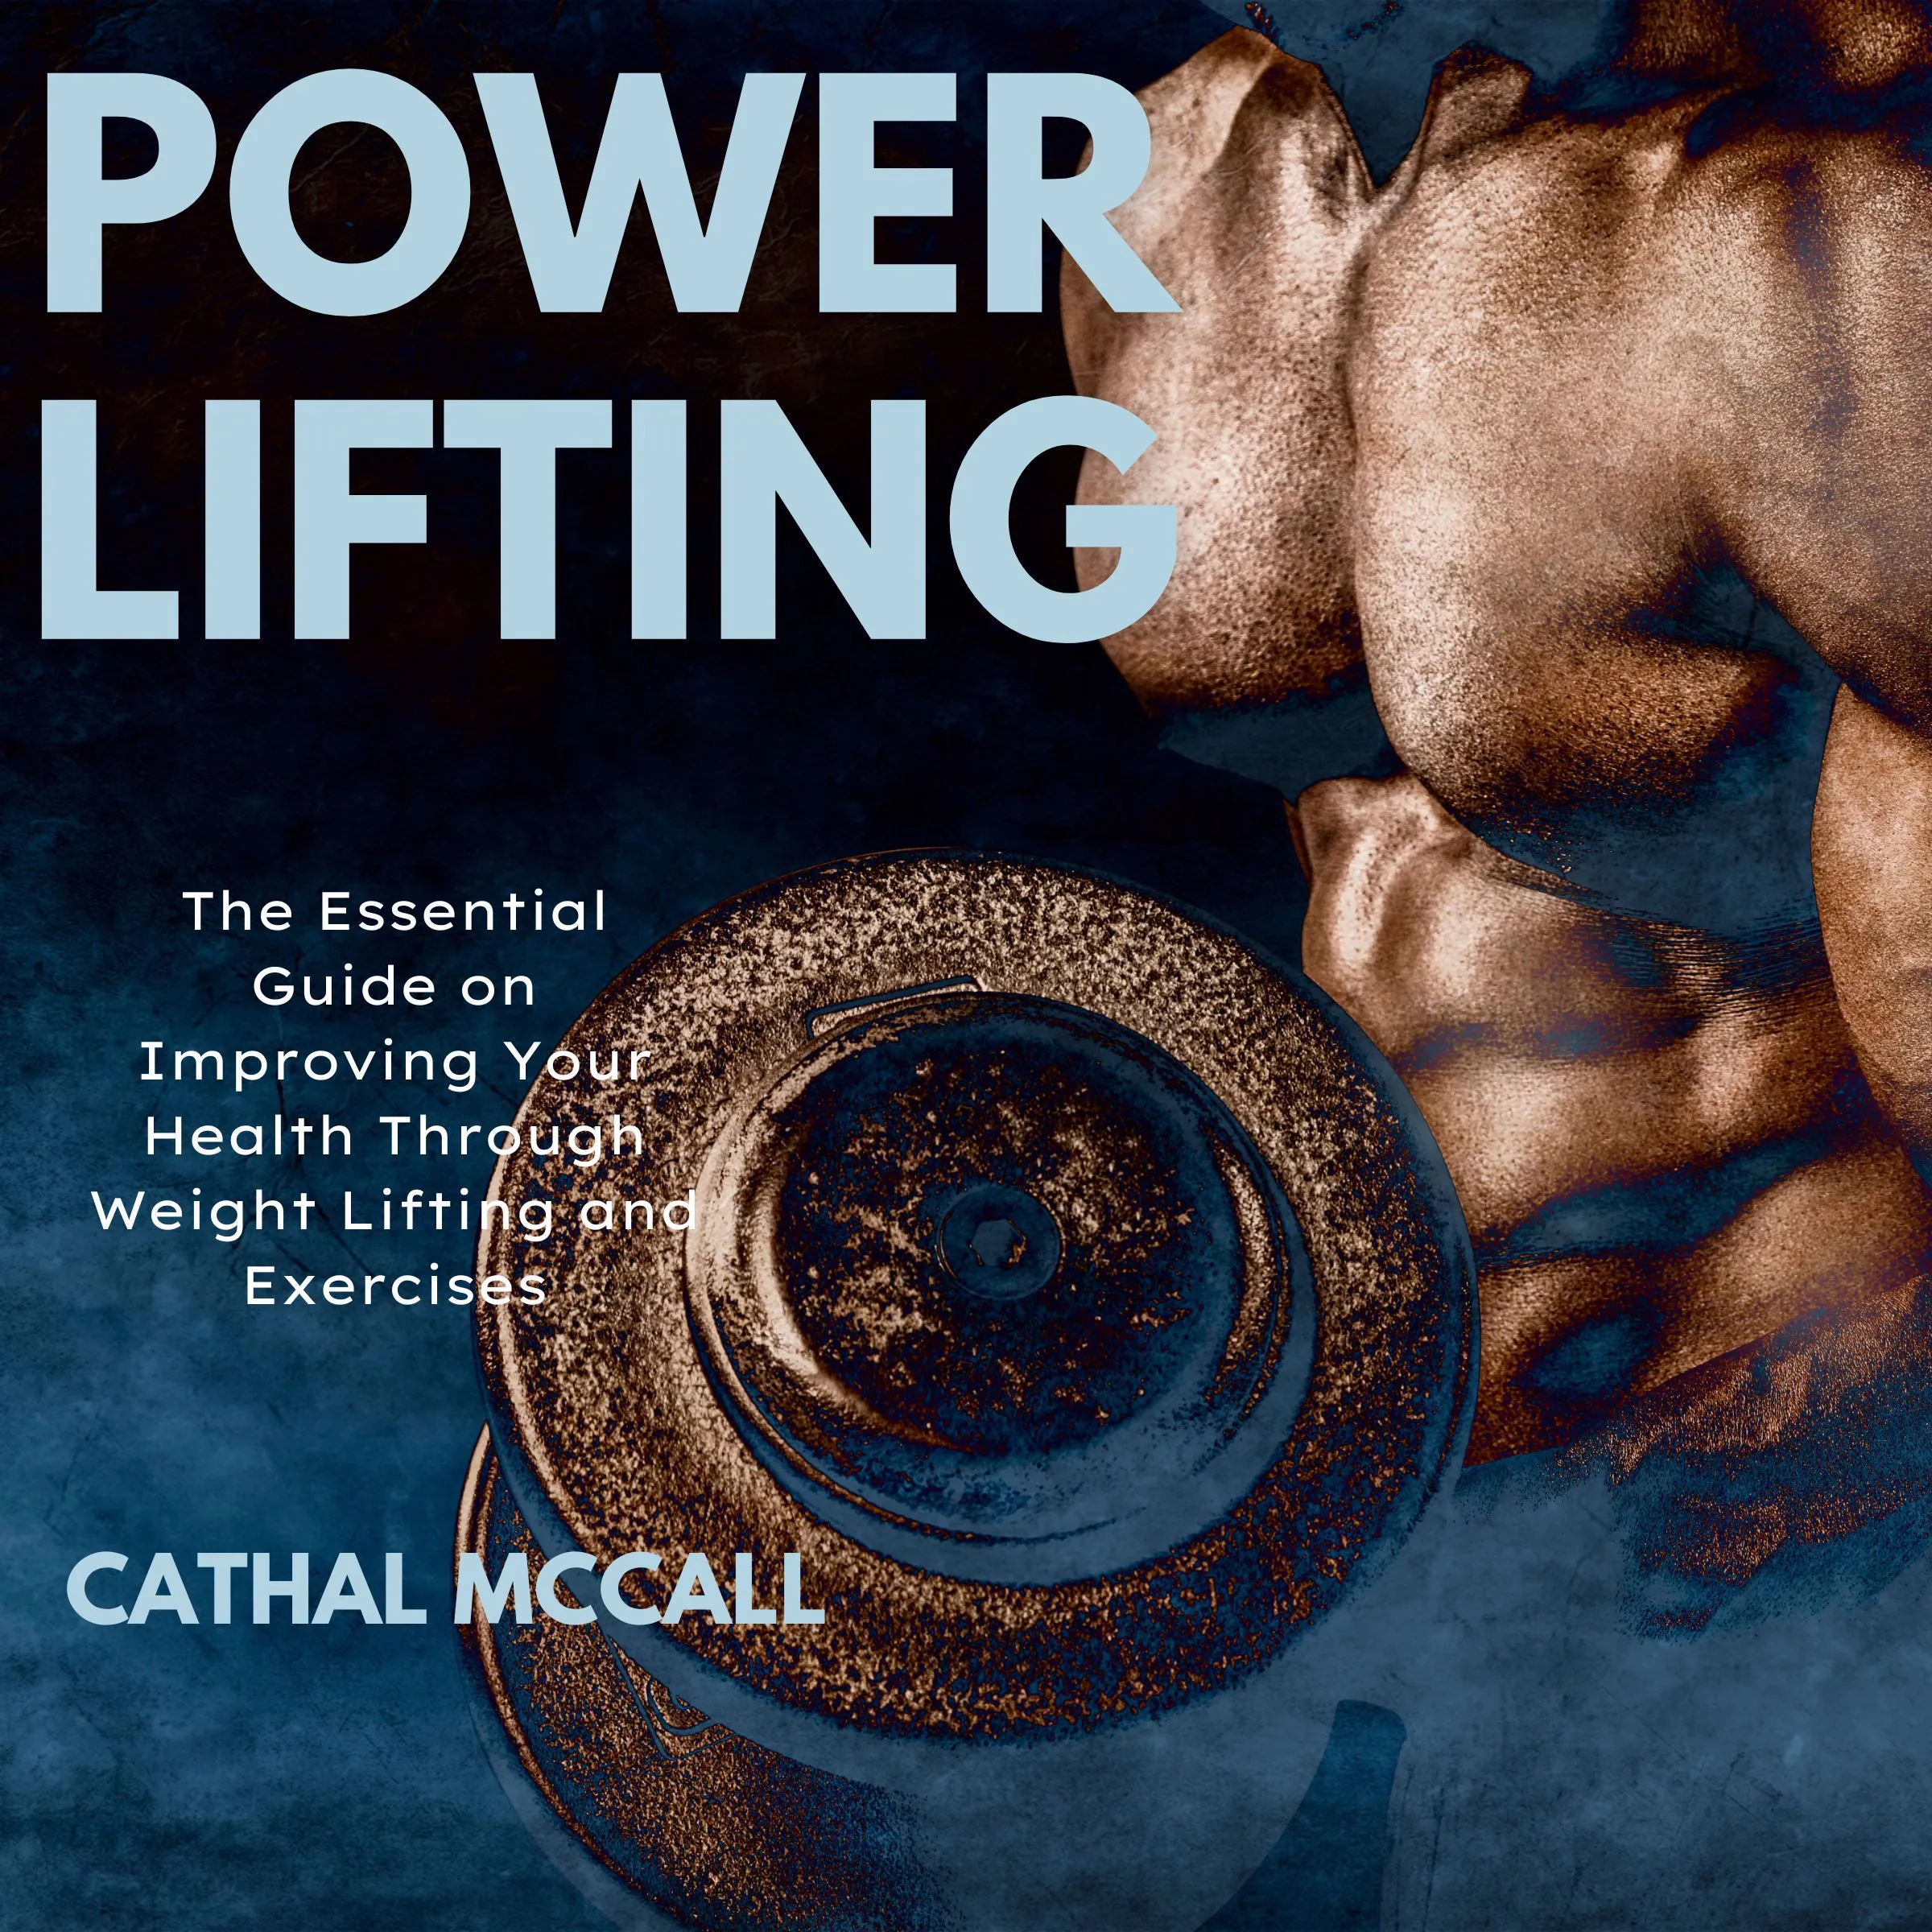 Power Lifting Audiobook by Cathal Mccall